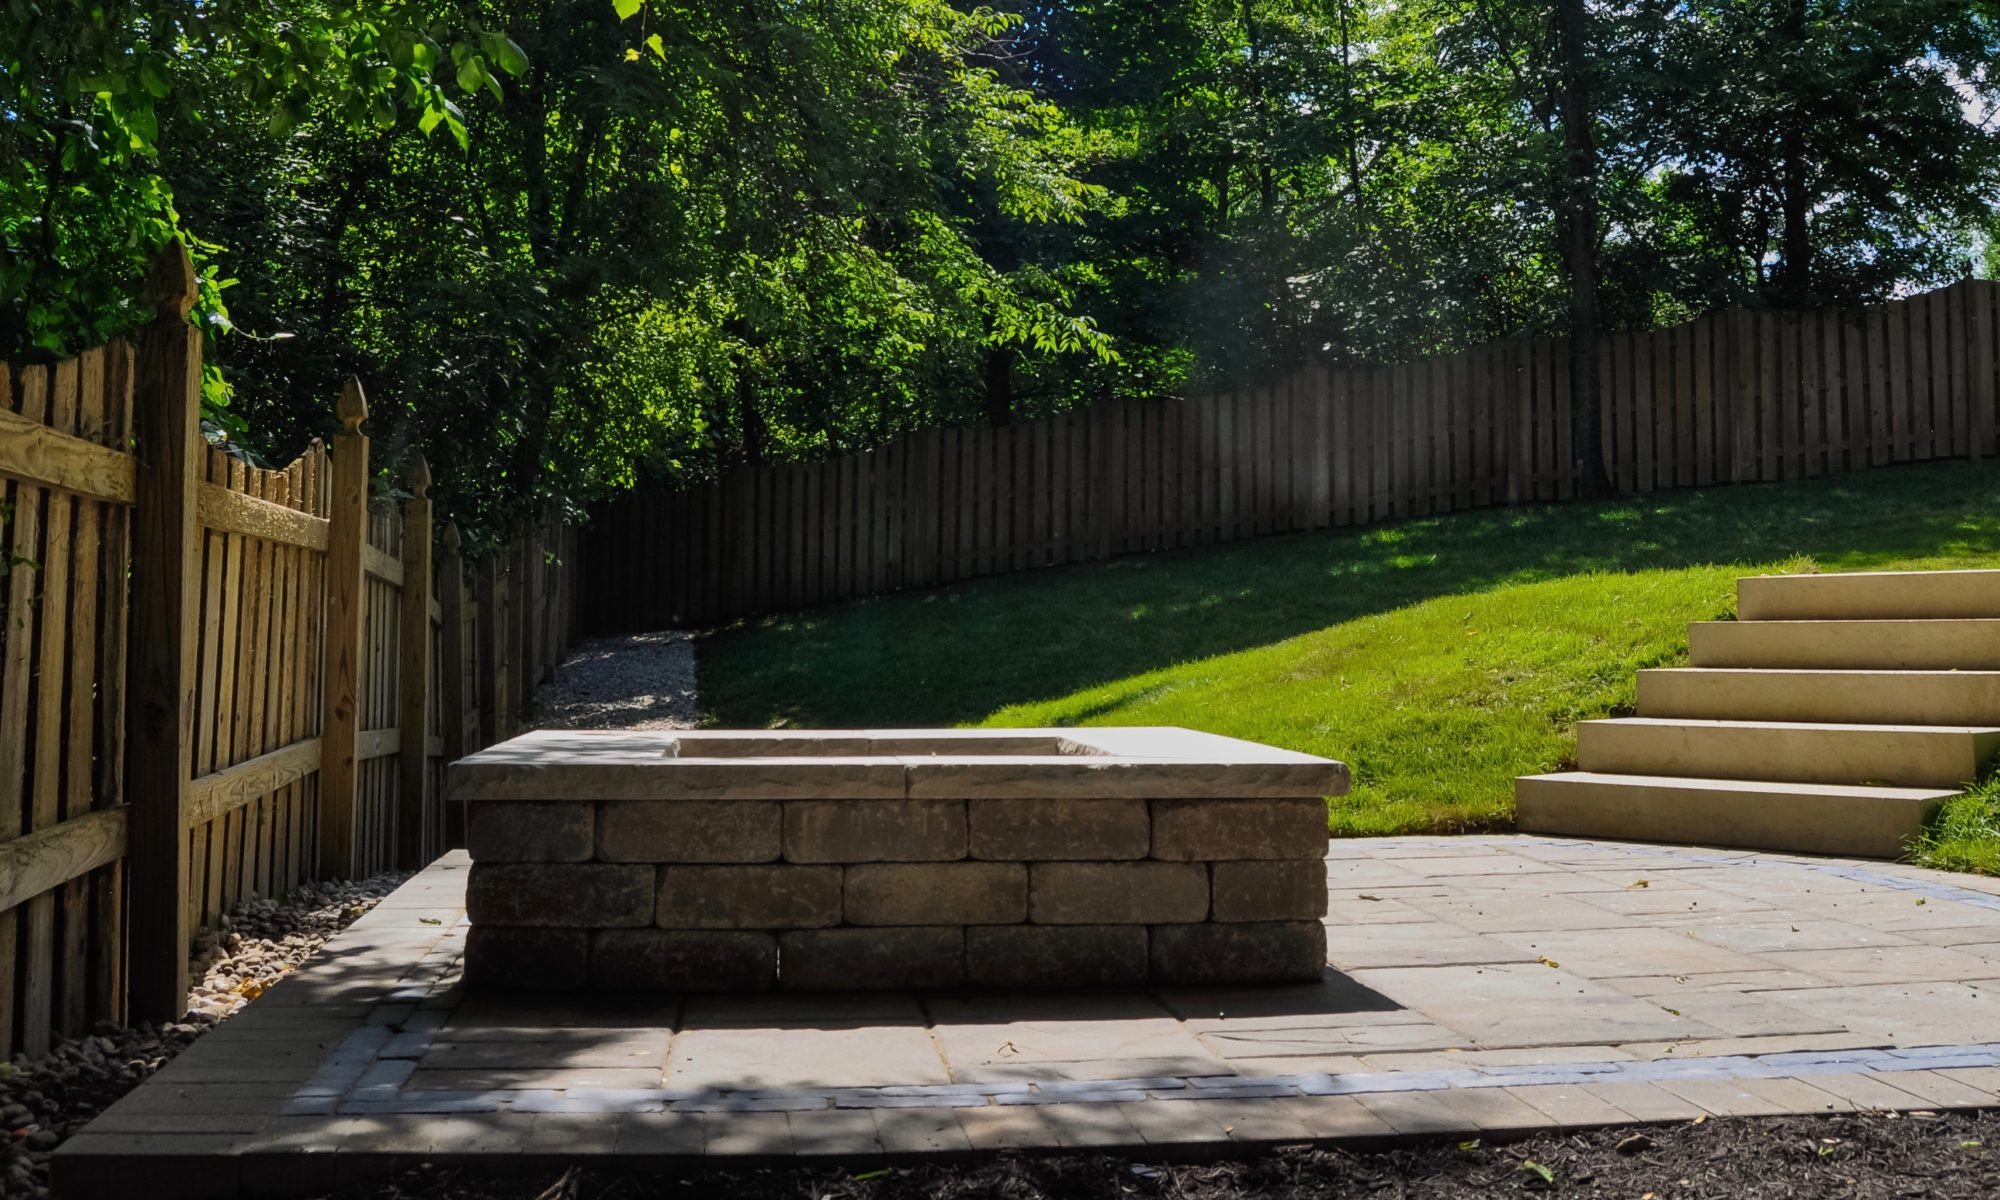 Precision Outdoors Fishers Paver Patio yard encompassing paver patio belgard lafitt material cotswald mist charcoal trim block firepit fire pit paved space quaint stairs porch bridge landing step landscaping mulching fishers indiana